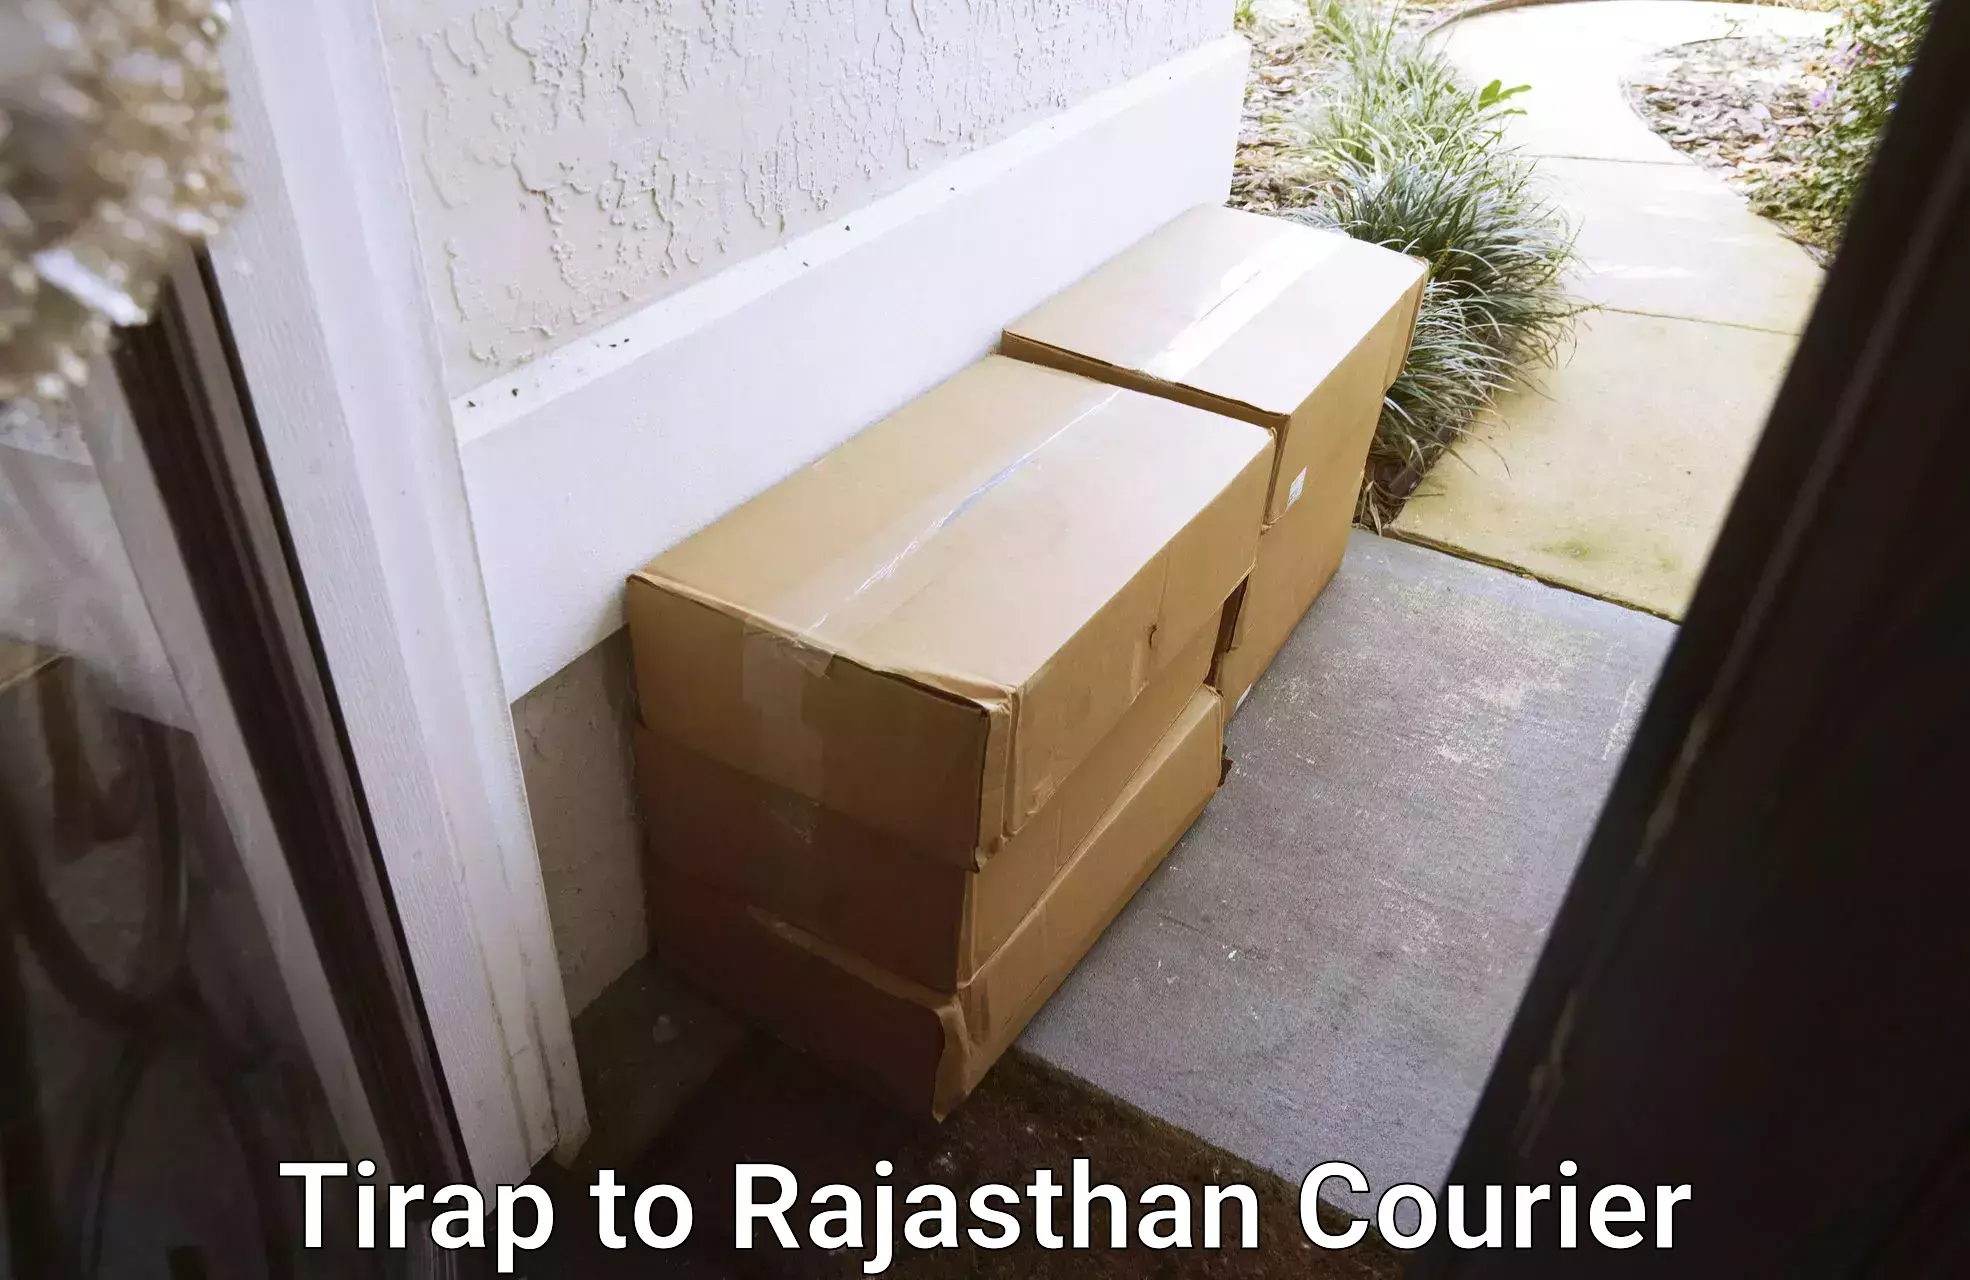 Multi-national courier services Tirap to Rajsamand